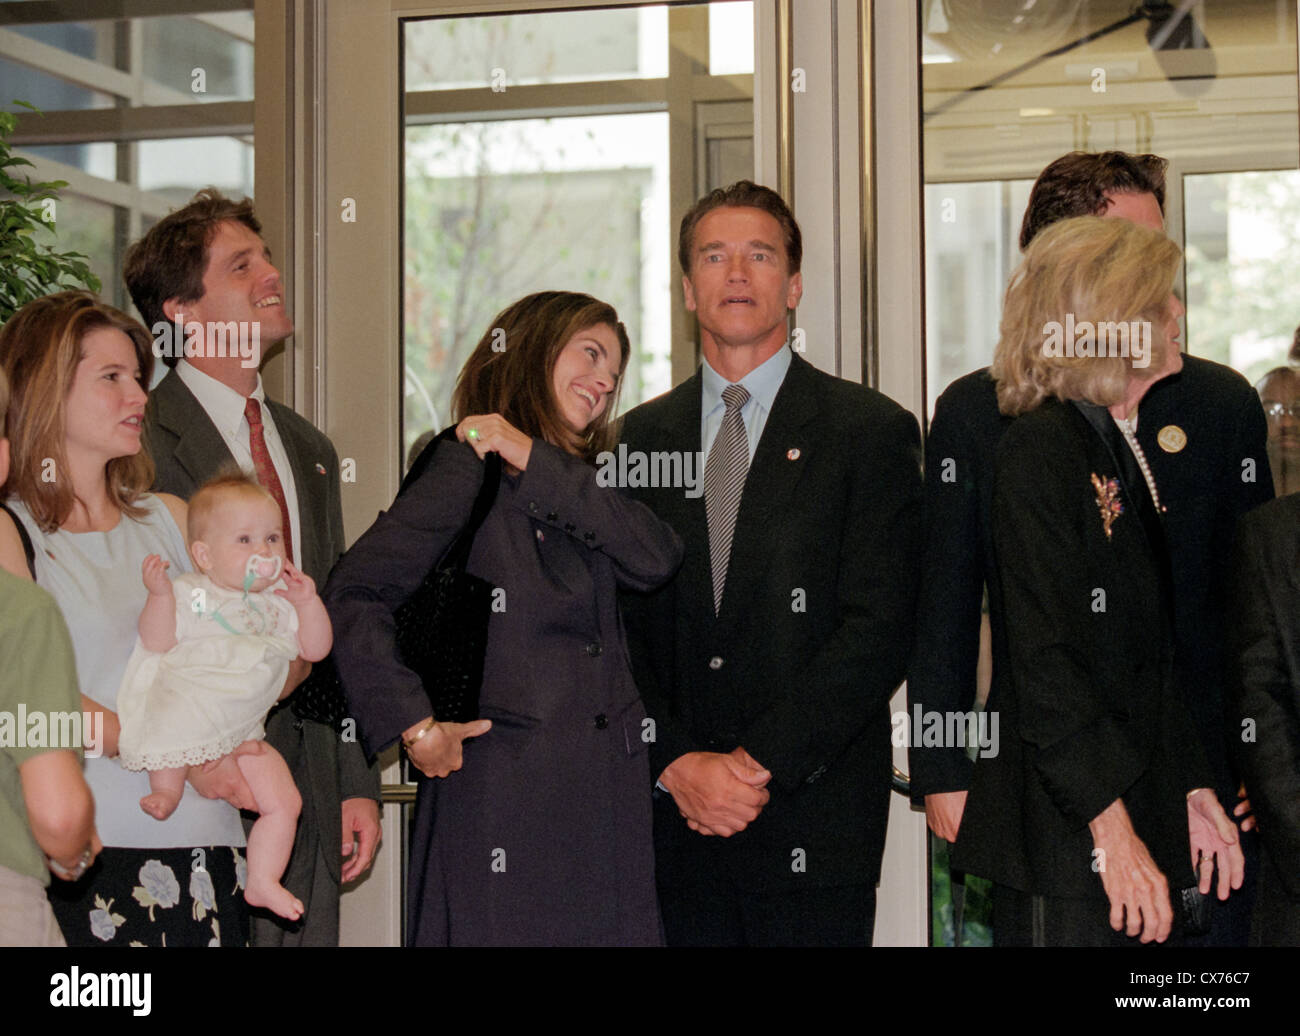 Members of the Shriver family attend the dedication of the new Peace Corps headquarters September 15, 1998 in Washington, DC. (L to R) Jeanne Shriver, holding six-month-old daughter Molly, Jeanne's husband Mark Shriver, Maria Shriver, Arnold Schwarzenegger and Eunice Shriver. Stock Photo